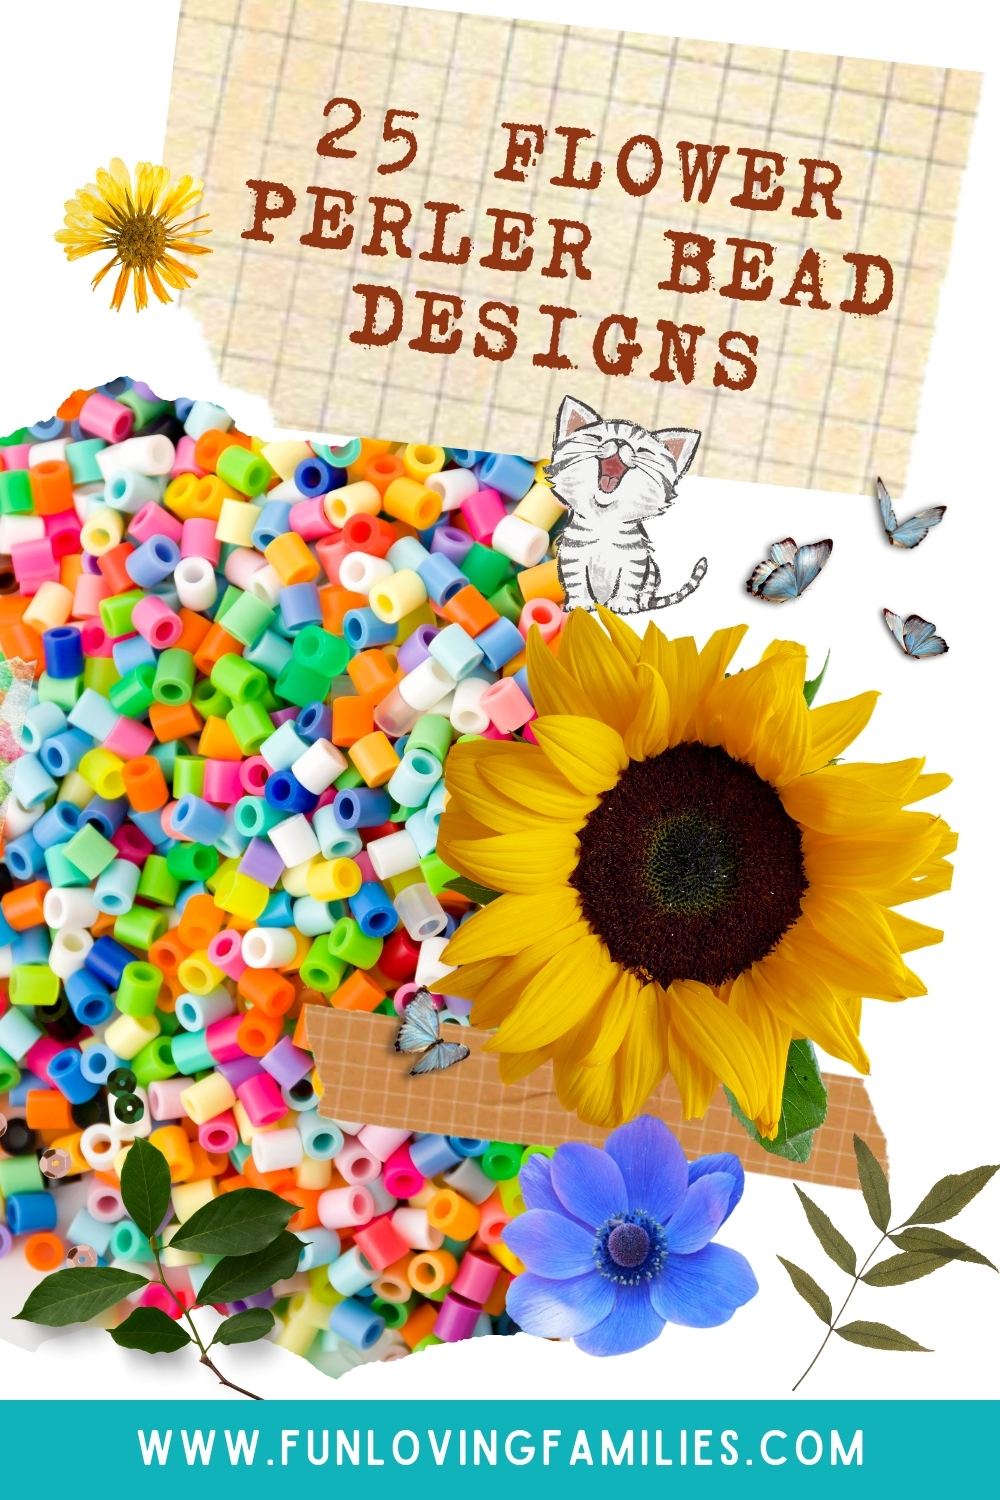 25 Flower Perler Bead Patterns, Designs and Ideas pin image